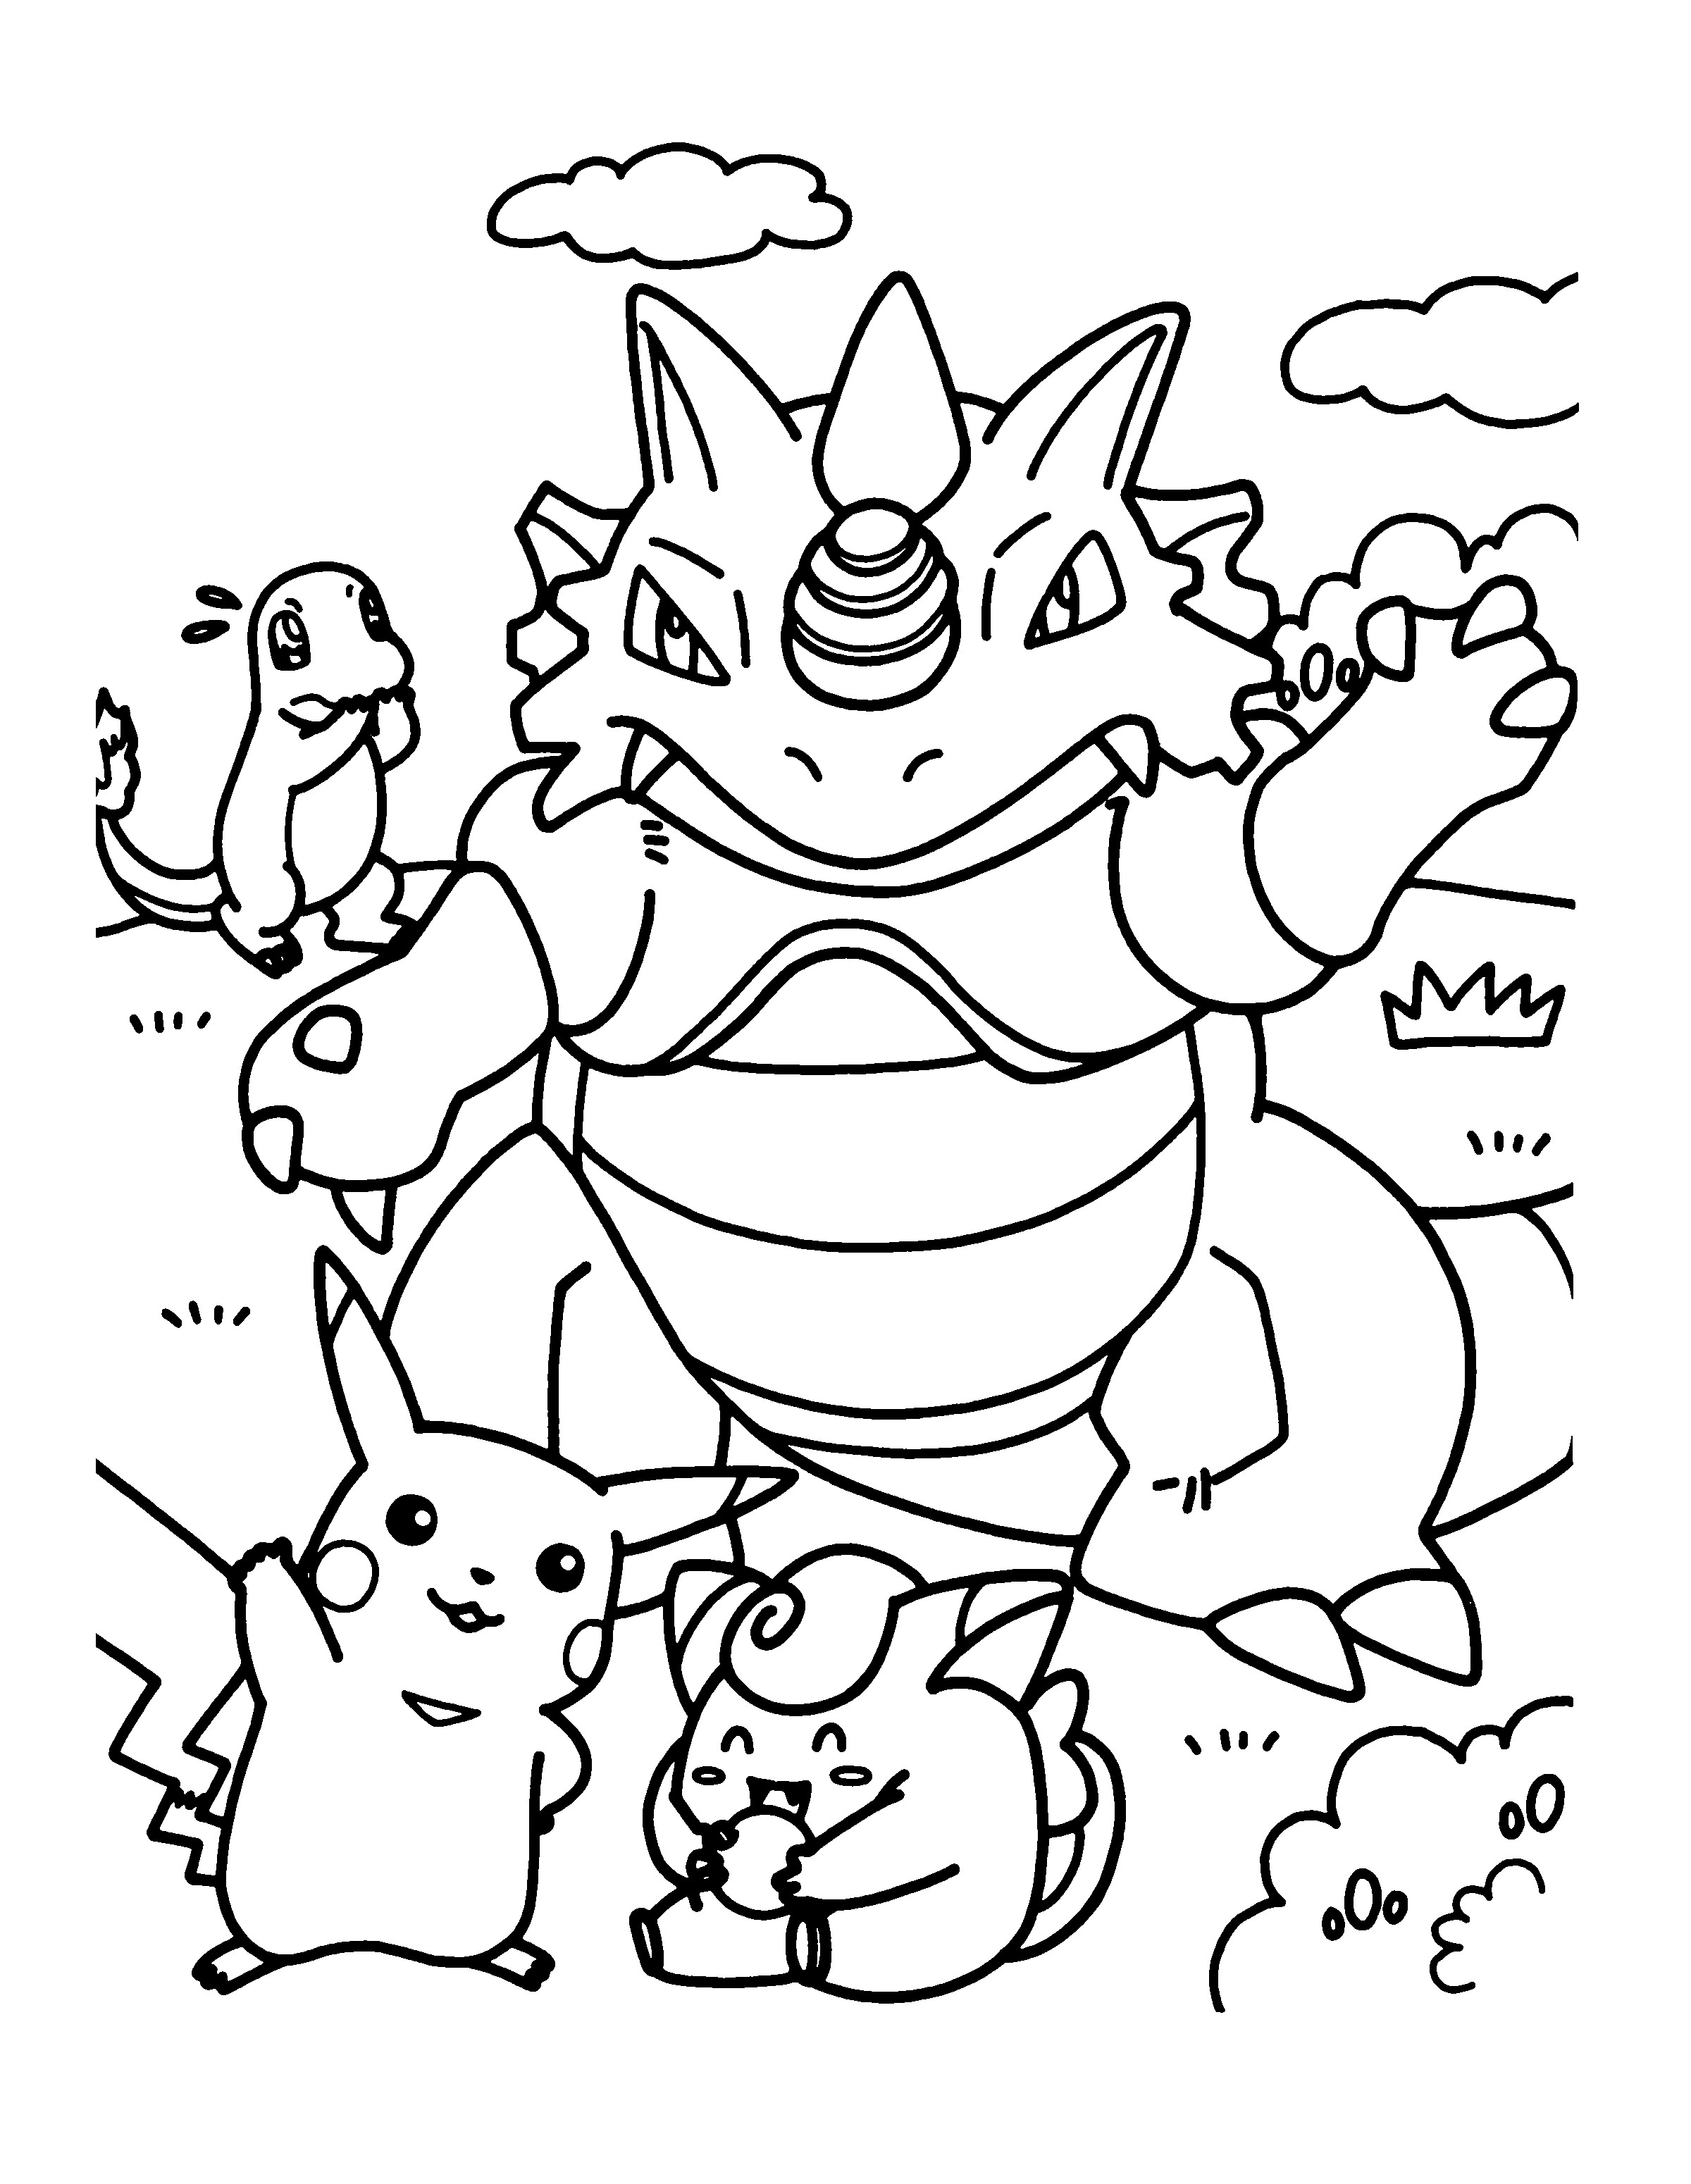 Coloring Sheets For Boys Pokemon
 Pokemon Coloring Pages Join your favorite Pokemon on an